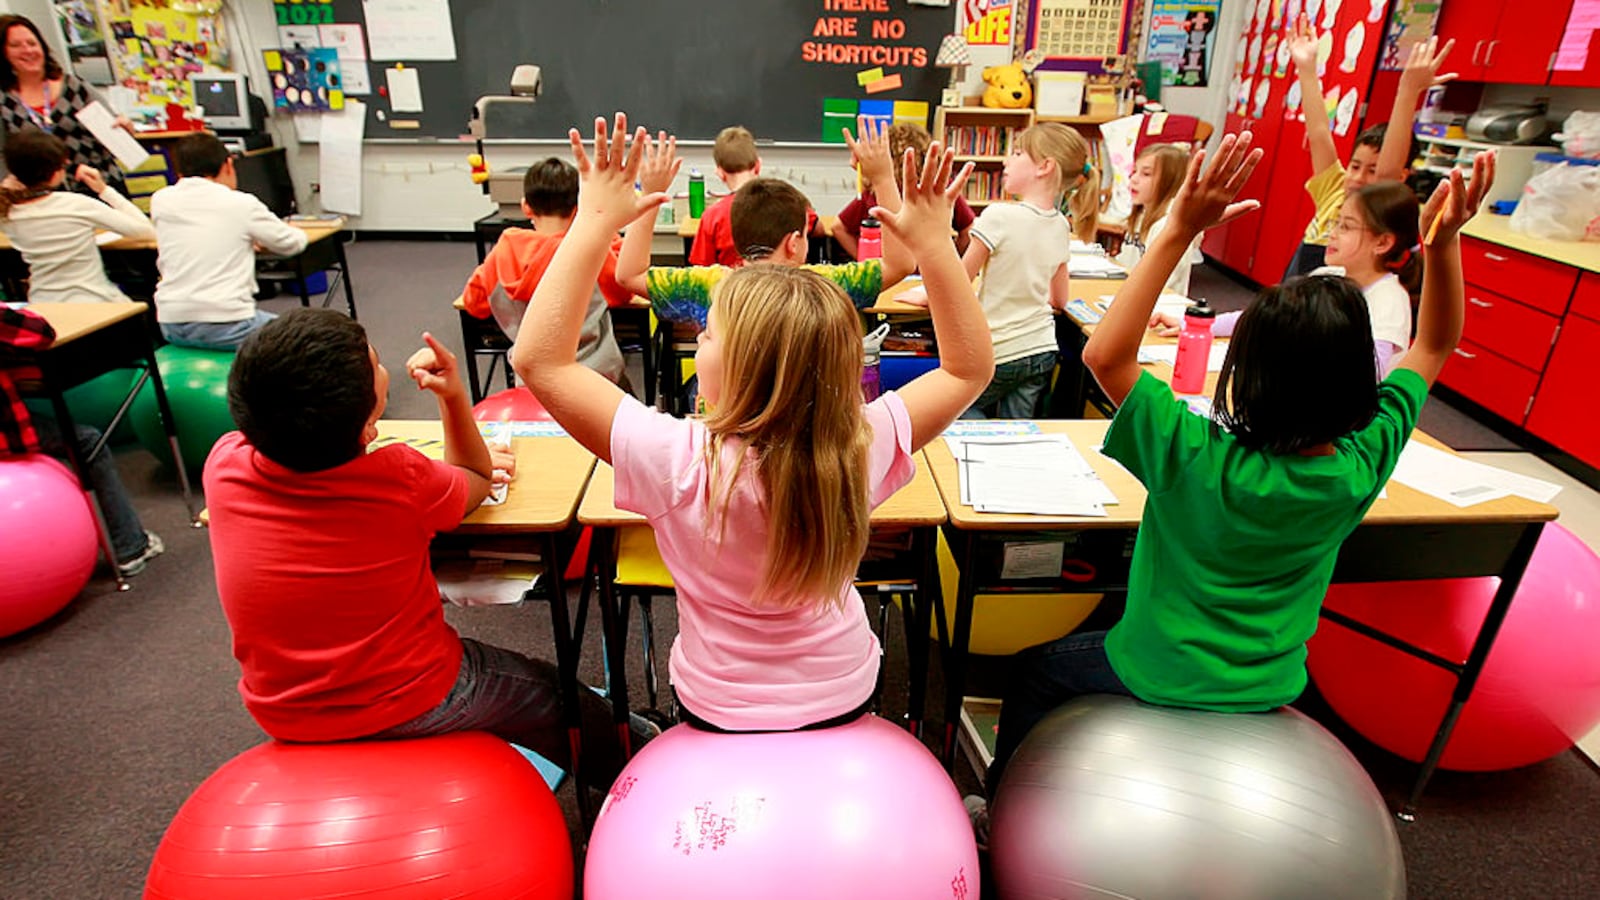 Leela Herena, from right, Emma Miller and Cesar Mendez sit on exercise balls which are used as chairs in a fourth-grade classroom at Creekside Elementary School in Elgin, Illinois, on October 26, 2009.  (Photo by Stacey Wescott/Chicago Tribune/MCT via Getty Images)